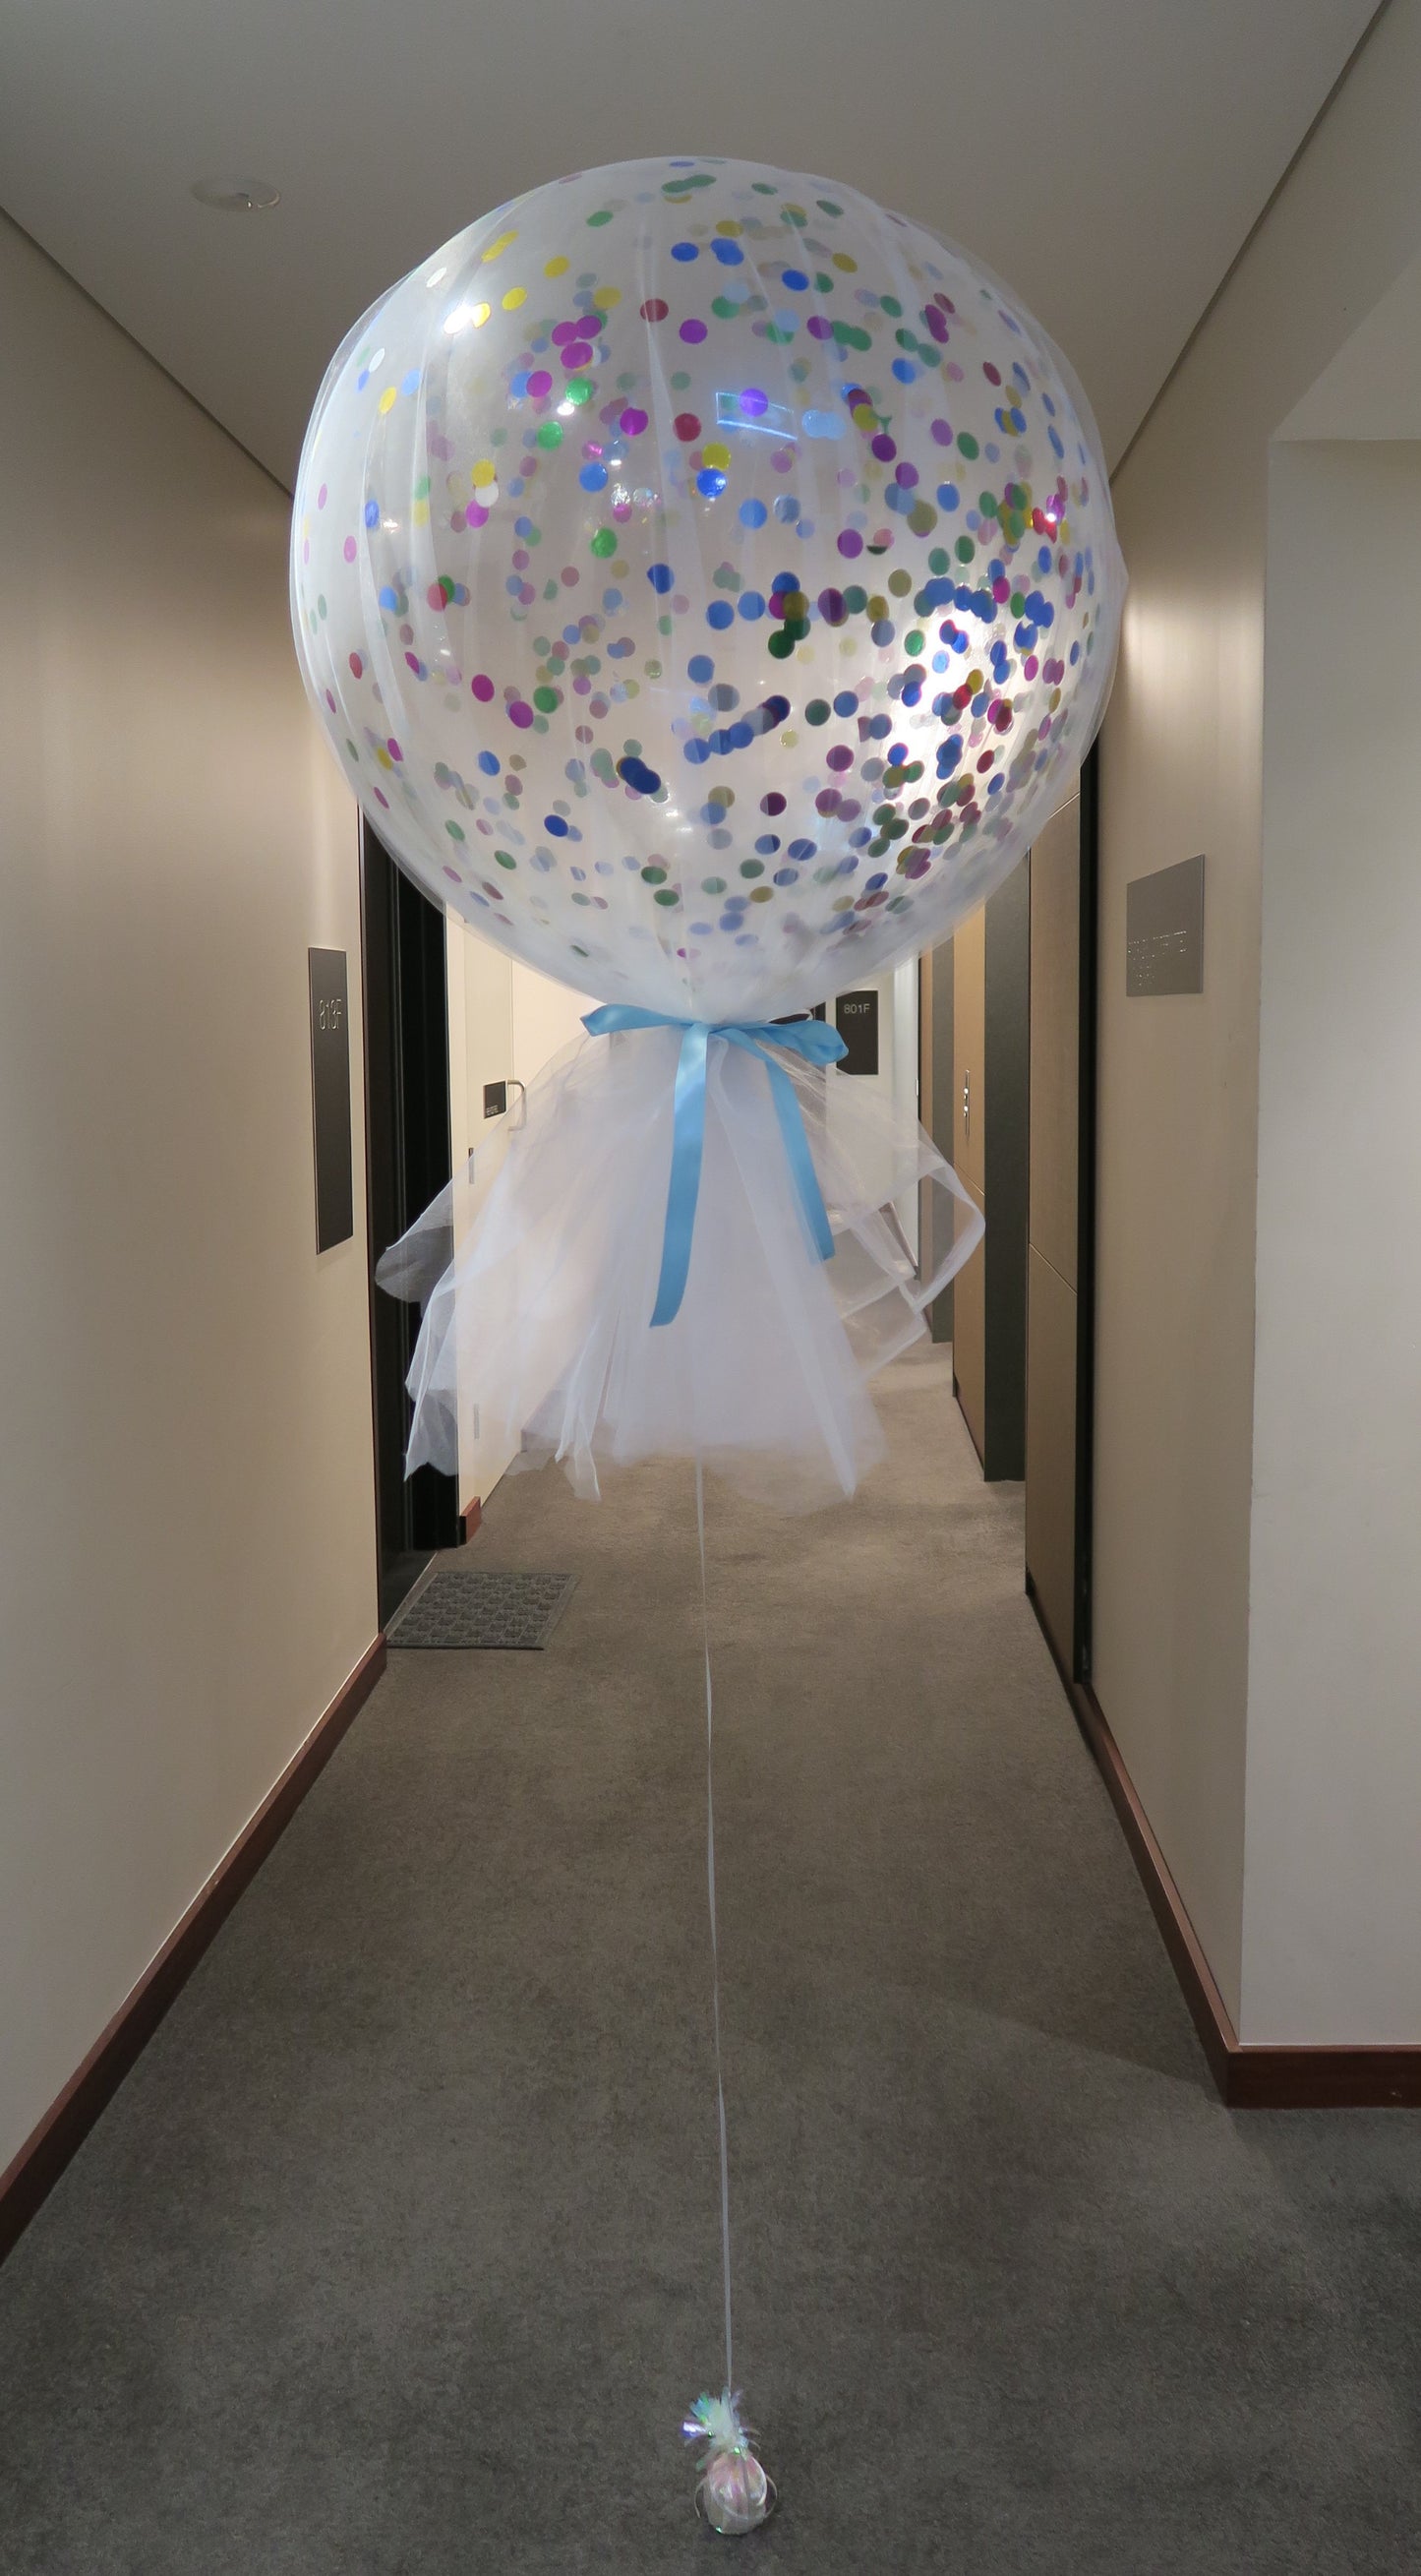 Tulle 3Ft round clear confetti balloon